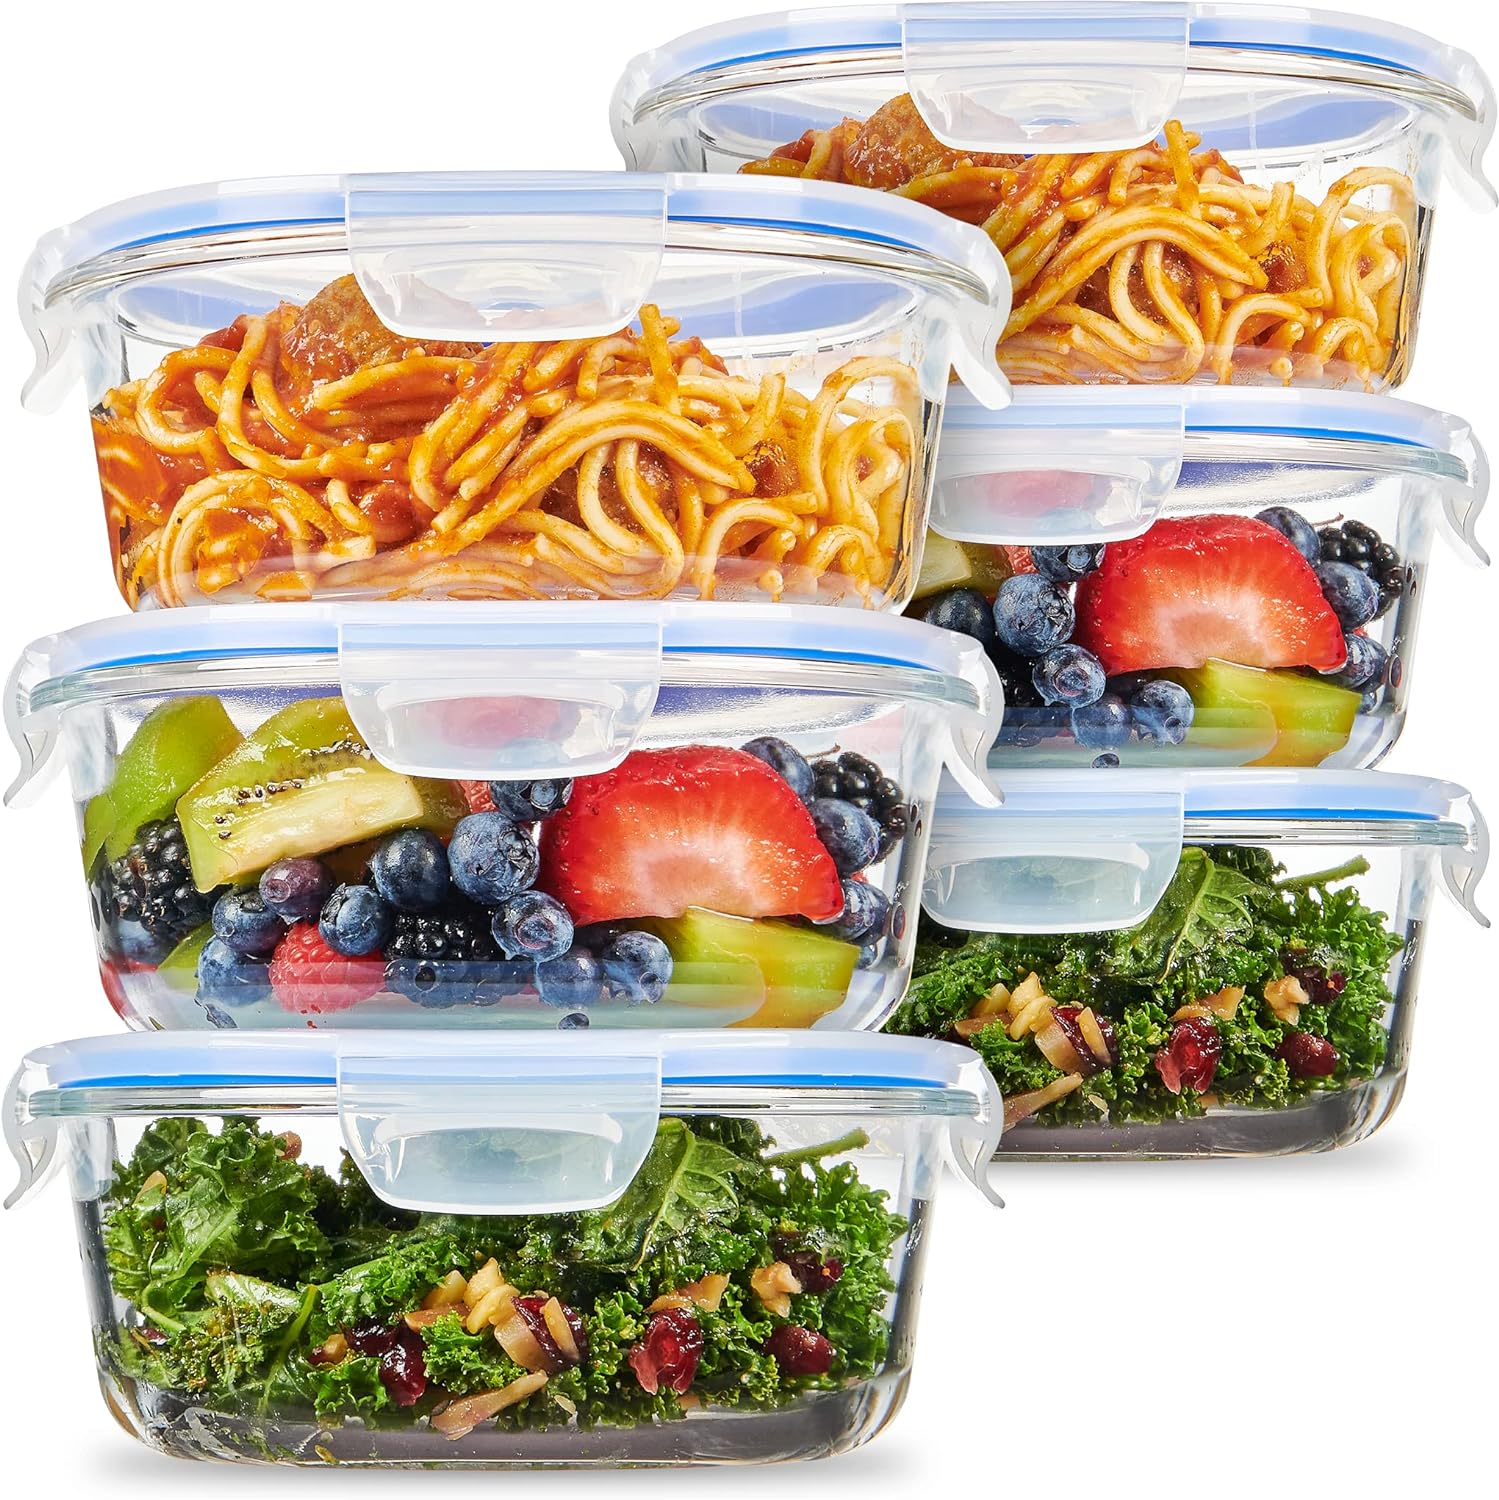 FineDine 12-Piece Superior Glass Food Storage Containers Set, 32oz Capacity - Newly Innovated Hinged Locking lids - 100% Leakproof Glass Meal-Prep Containers, Freezer-to-Oven-Safe (Blue)